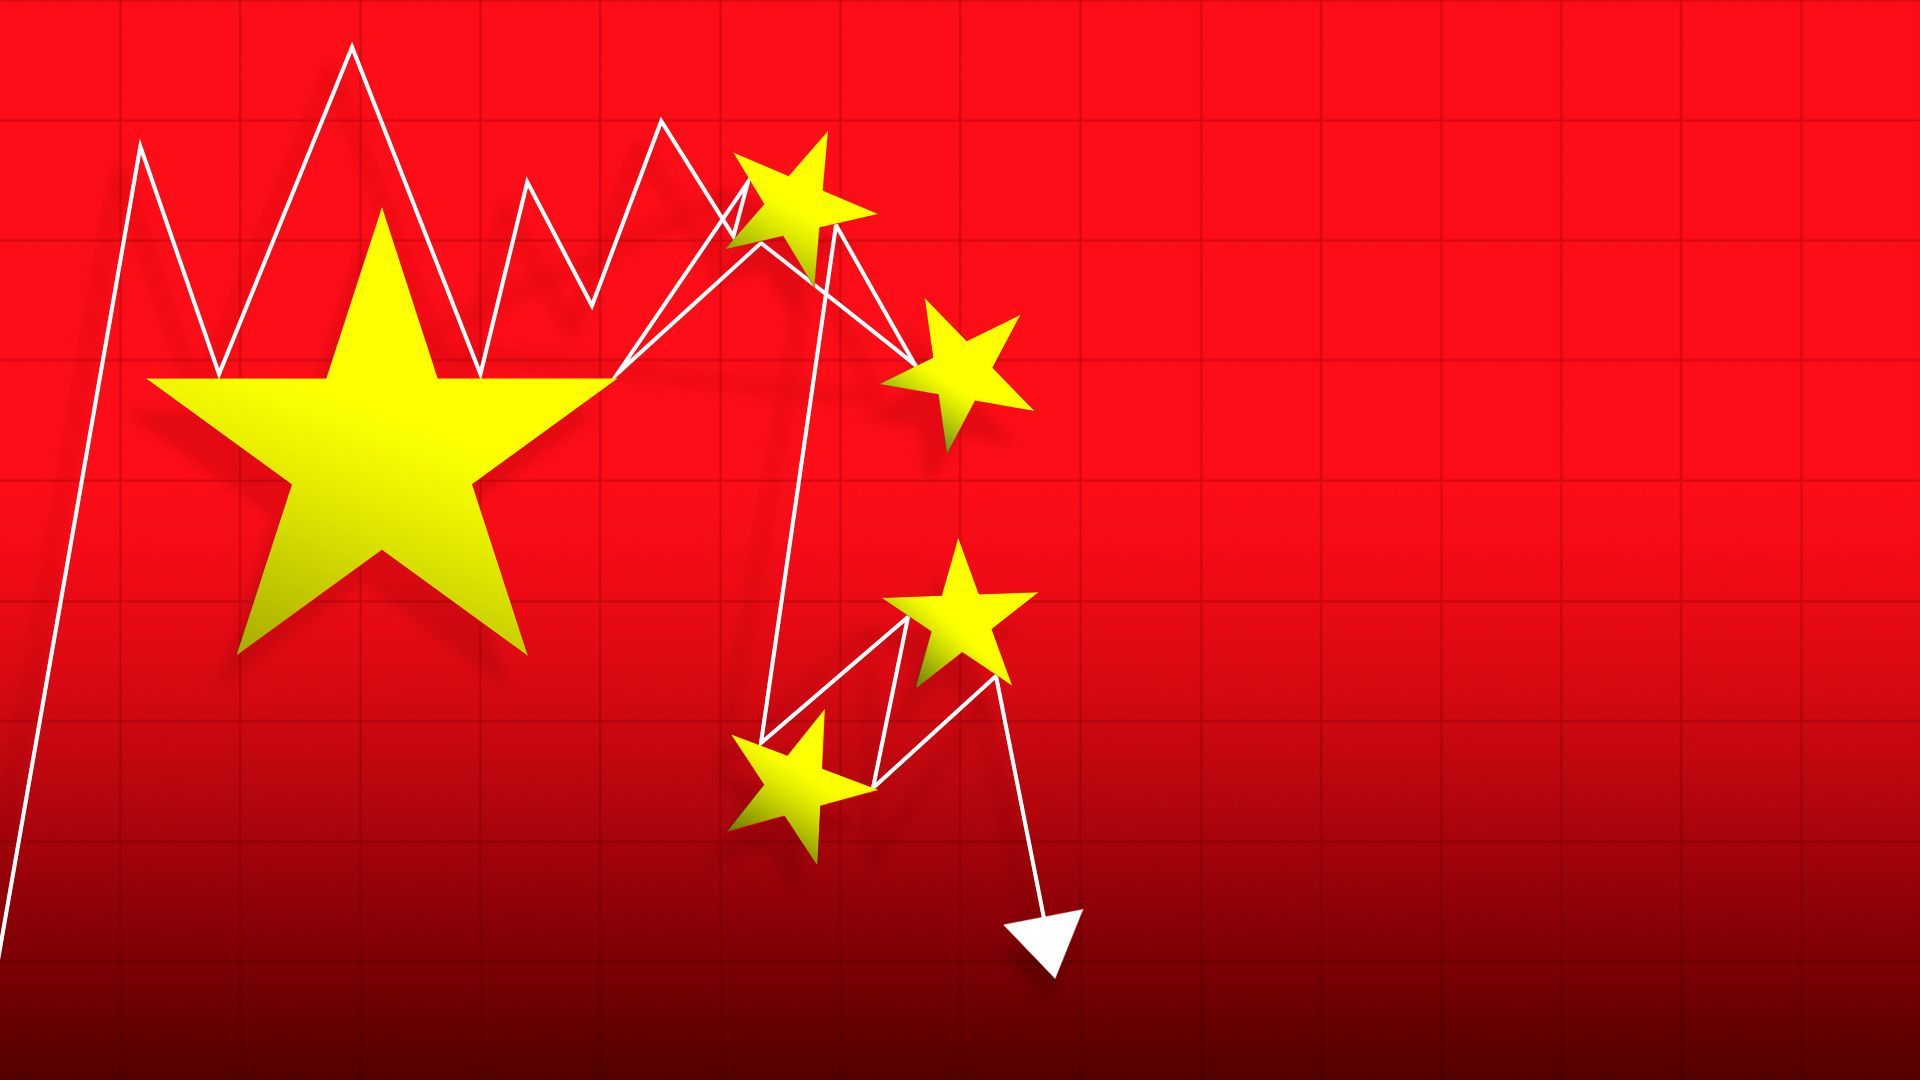 Illustration of a stock trend line rising above the stars of China's flag, then bouncing and tangling between the stars before trending downward